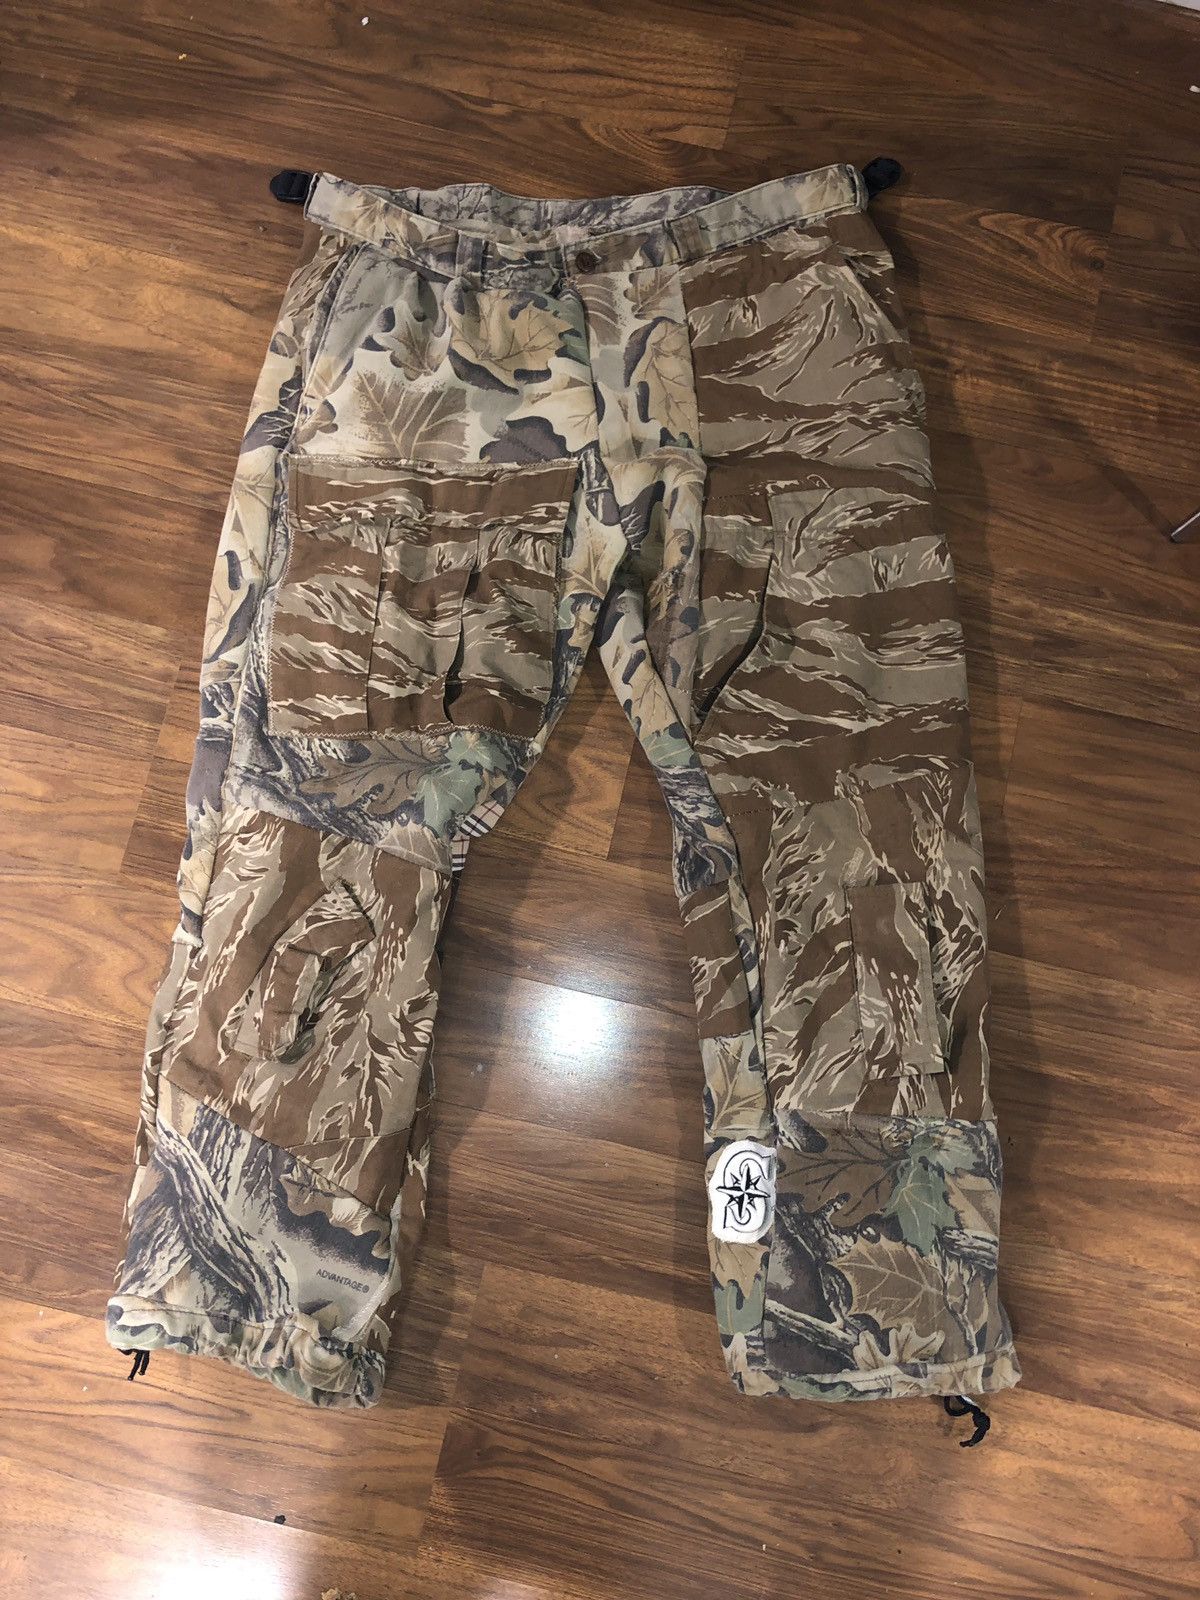 Other 1 of 1 camo pants | Grailed